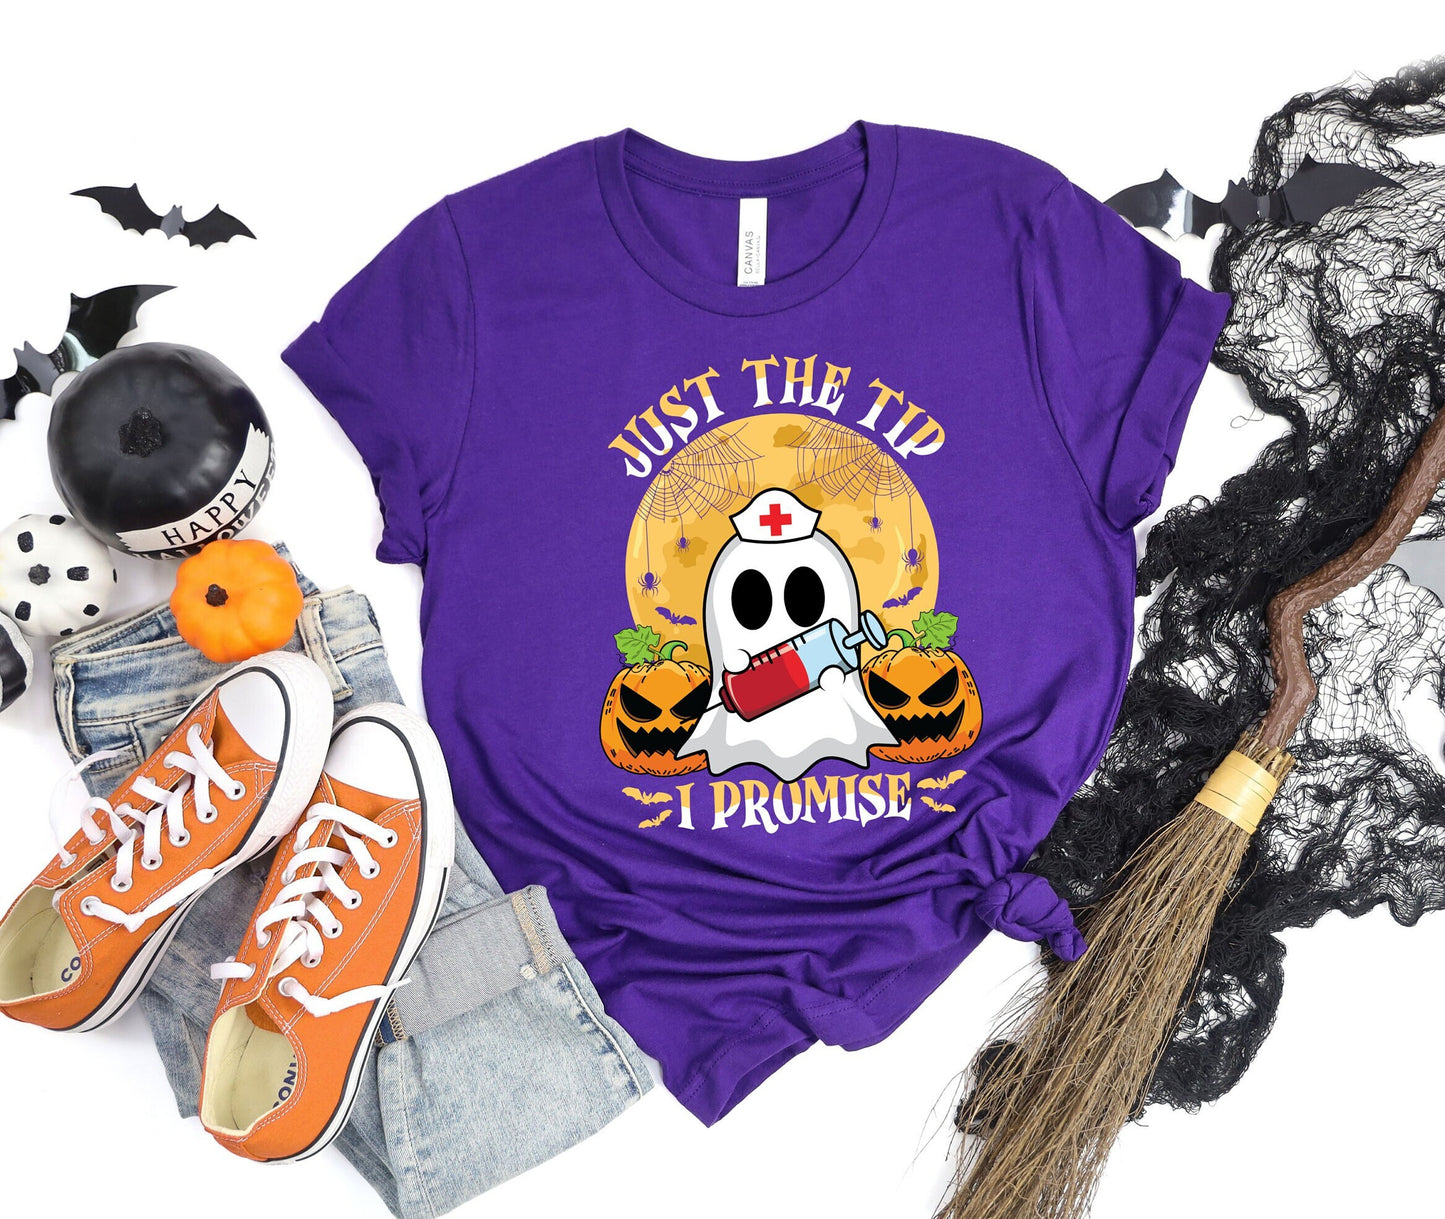 Just the Tip I promise Halloween Nursing Ghost T shirt.  This stylish Tee has a cool design of a Ghost with a nurse hat holding a syringe next to pumpkins spiders and bats. Makes a perfect gift for Halloween and for nurses.
www.scorpiontees.etsy.com